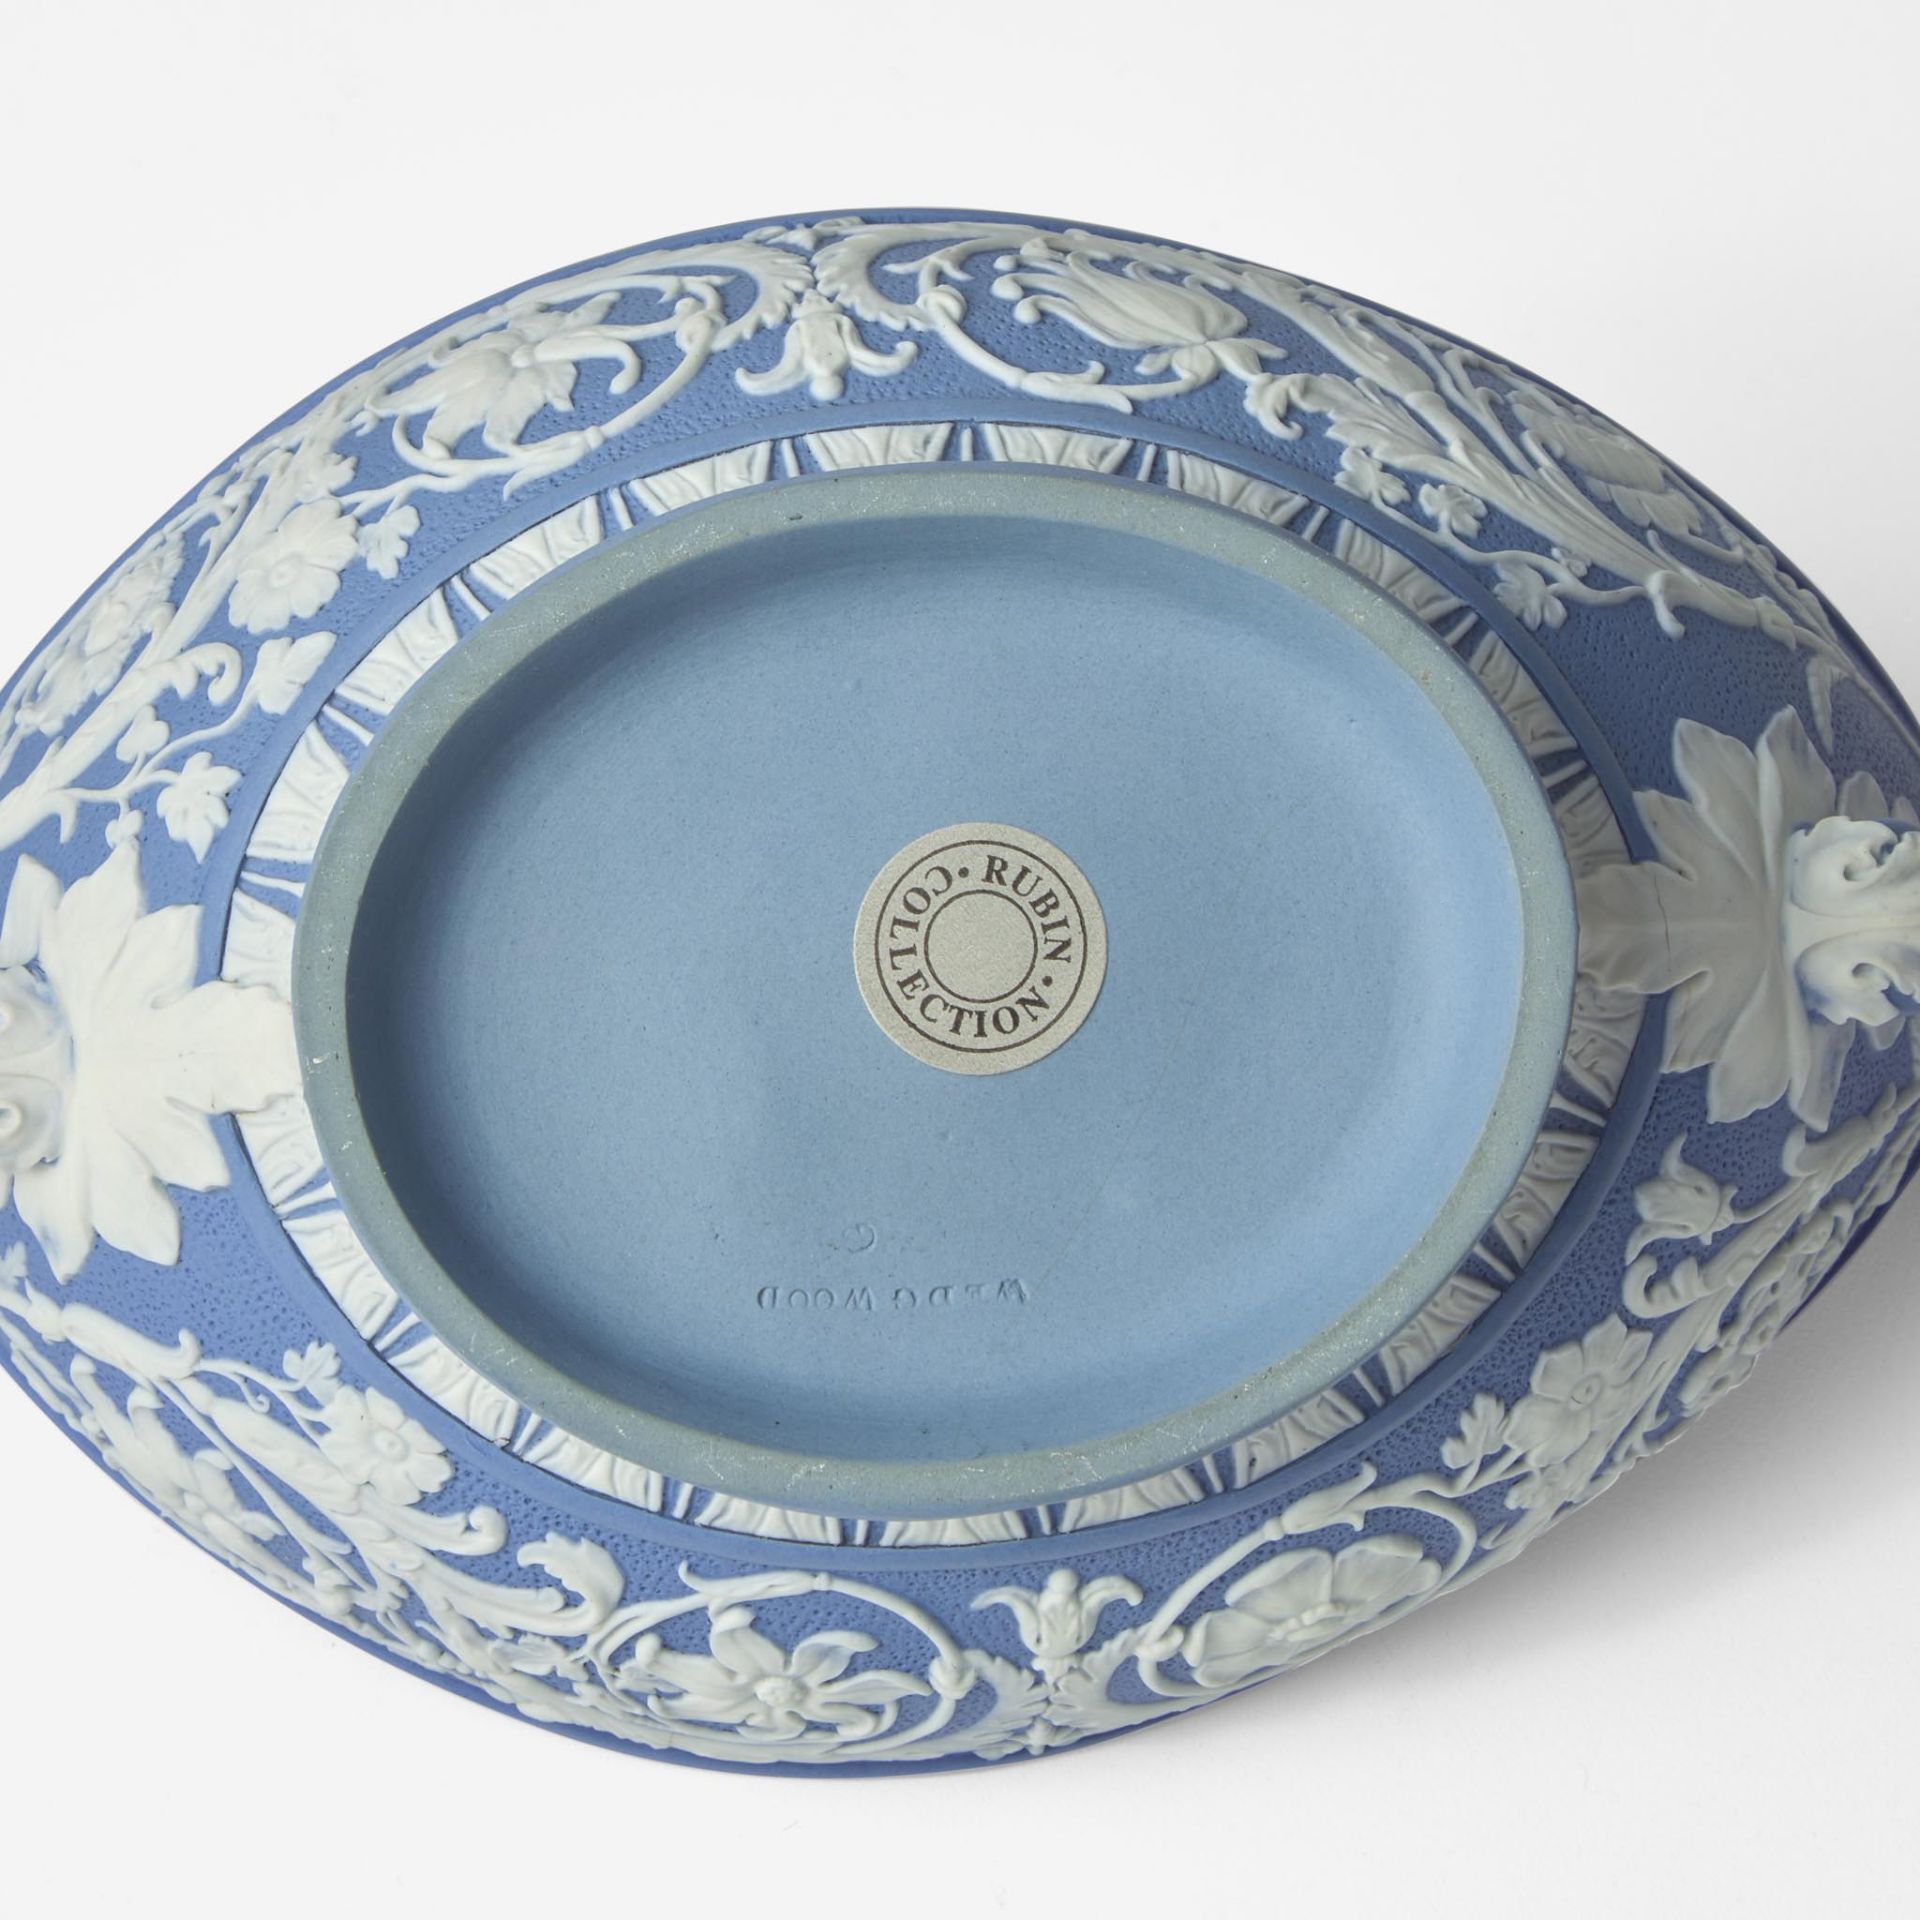 A Wedgwood Solid Blue Jasperware Handled Bowl and Spoon UK, 1780s - Image 3 of 3